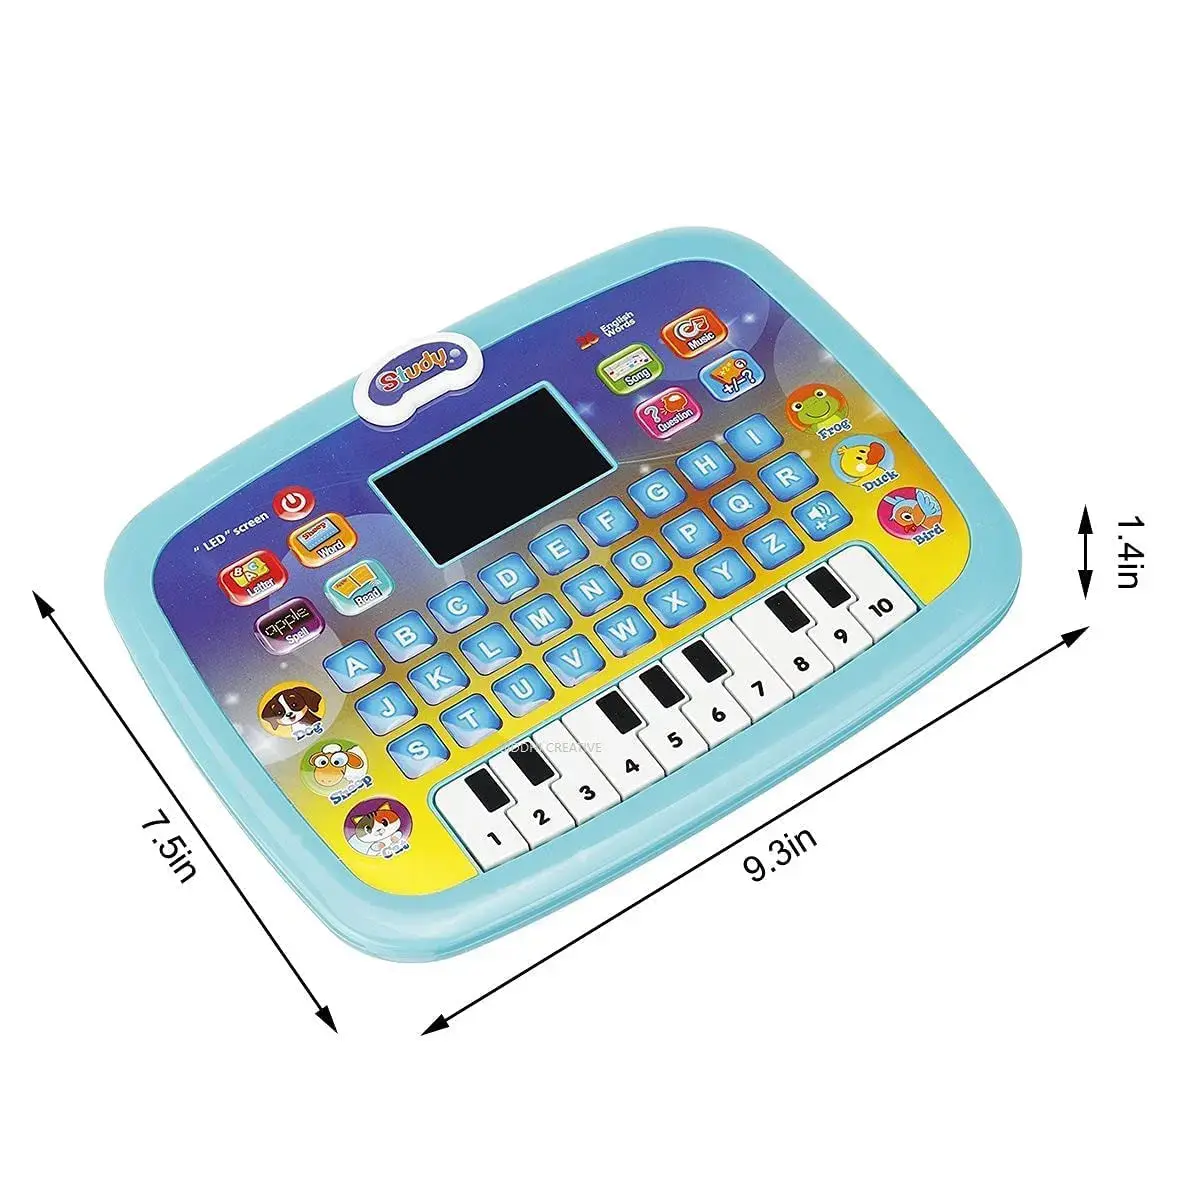 Learning Tablet Toy